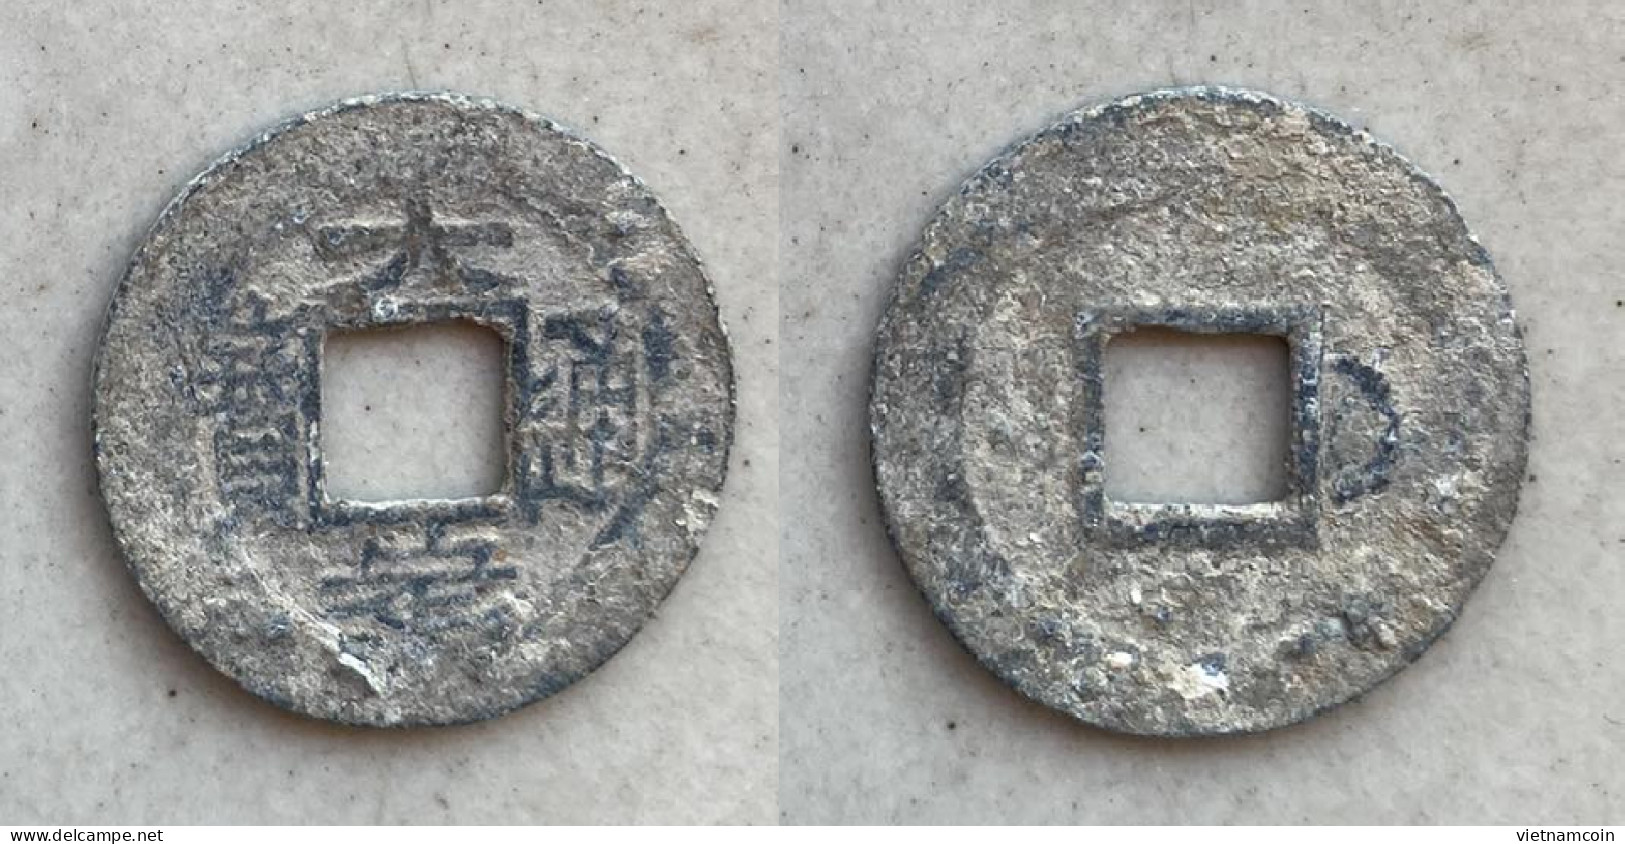 Ancient Annam Coin Dai Dinh Thong Bao (zinc Coin) THE  NGUYEN LORDS (1558-1778) - Vietnam